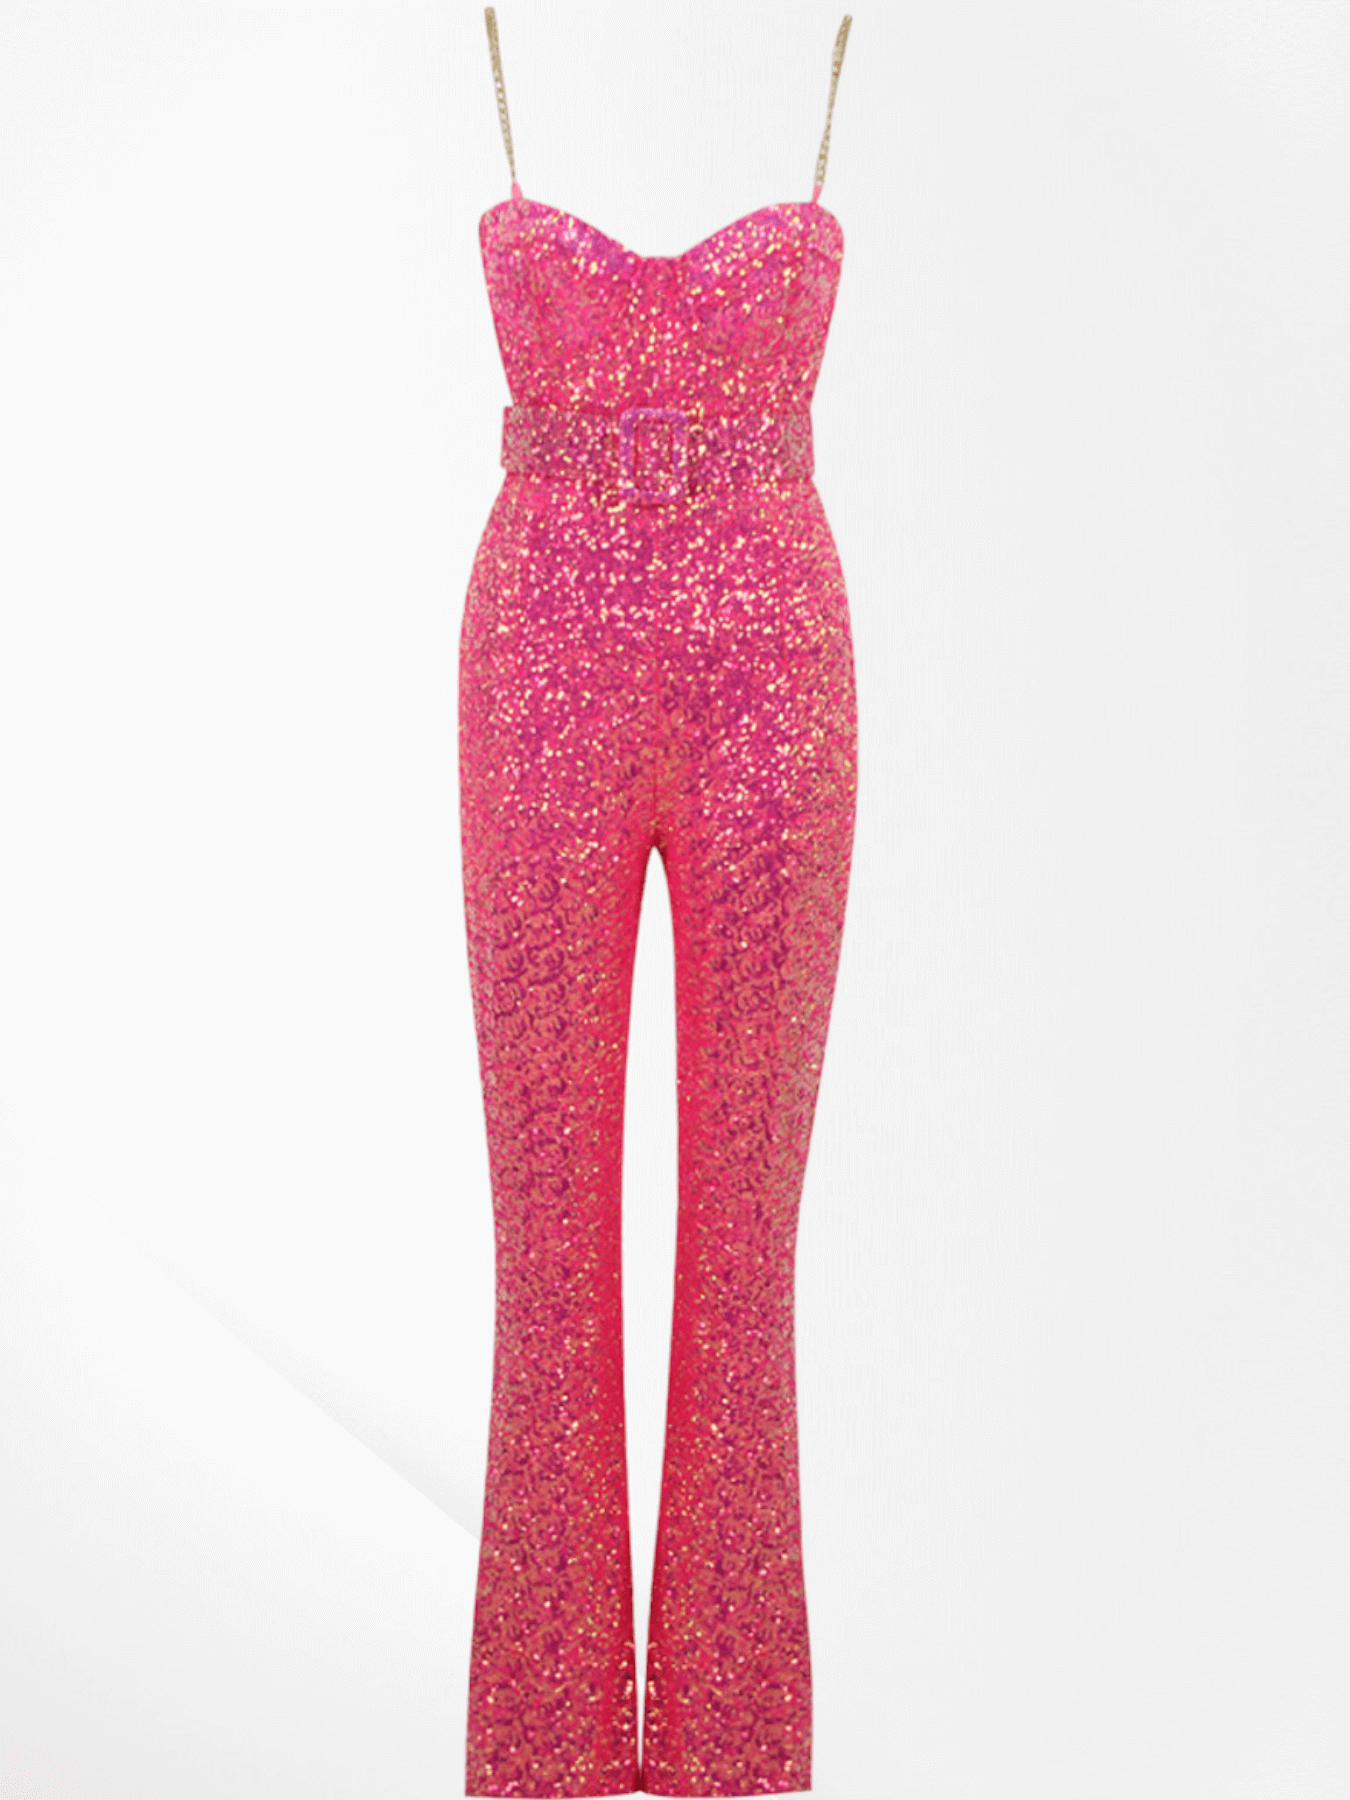 Pink sequined jumpsuit with spaghetti straps and coordinating belt